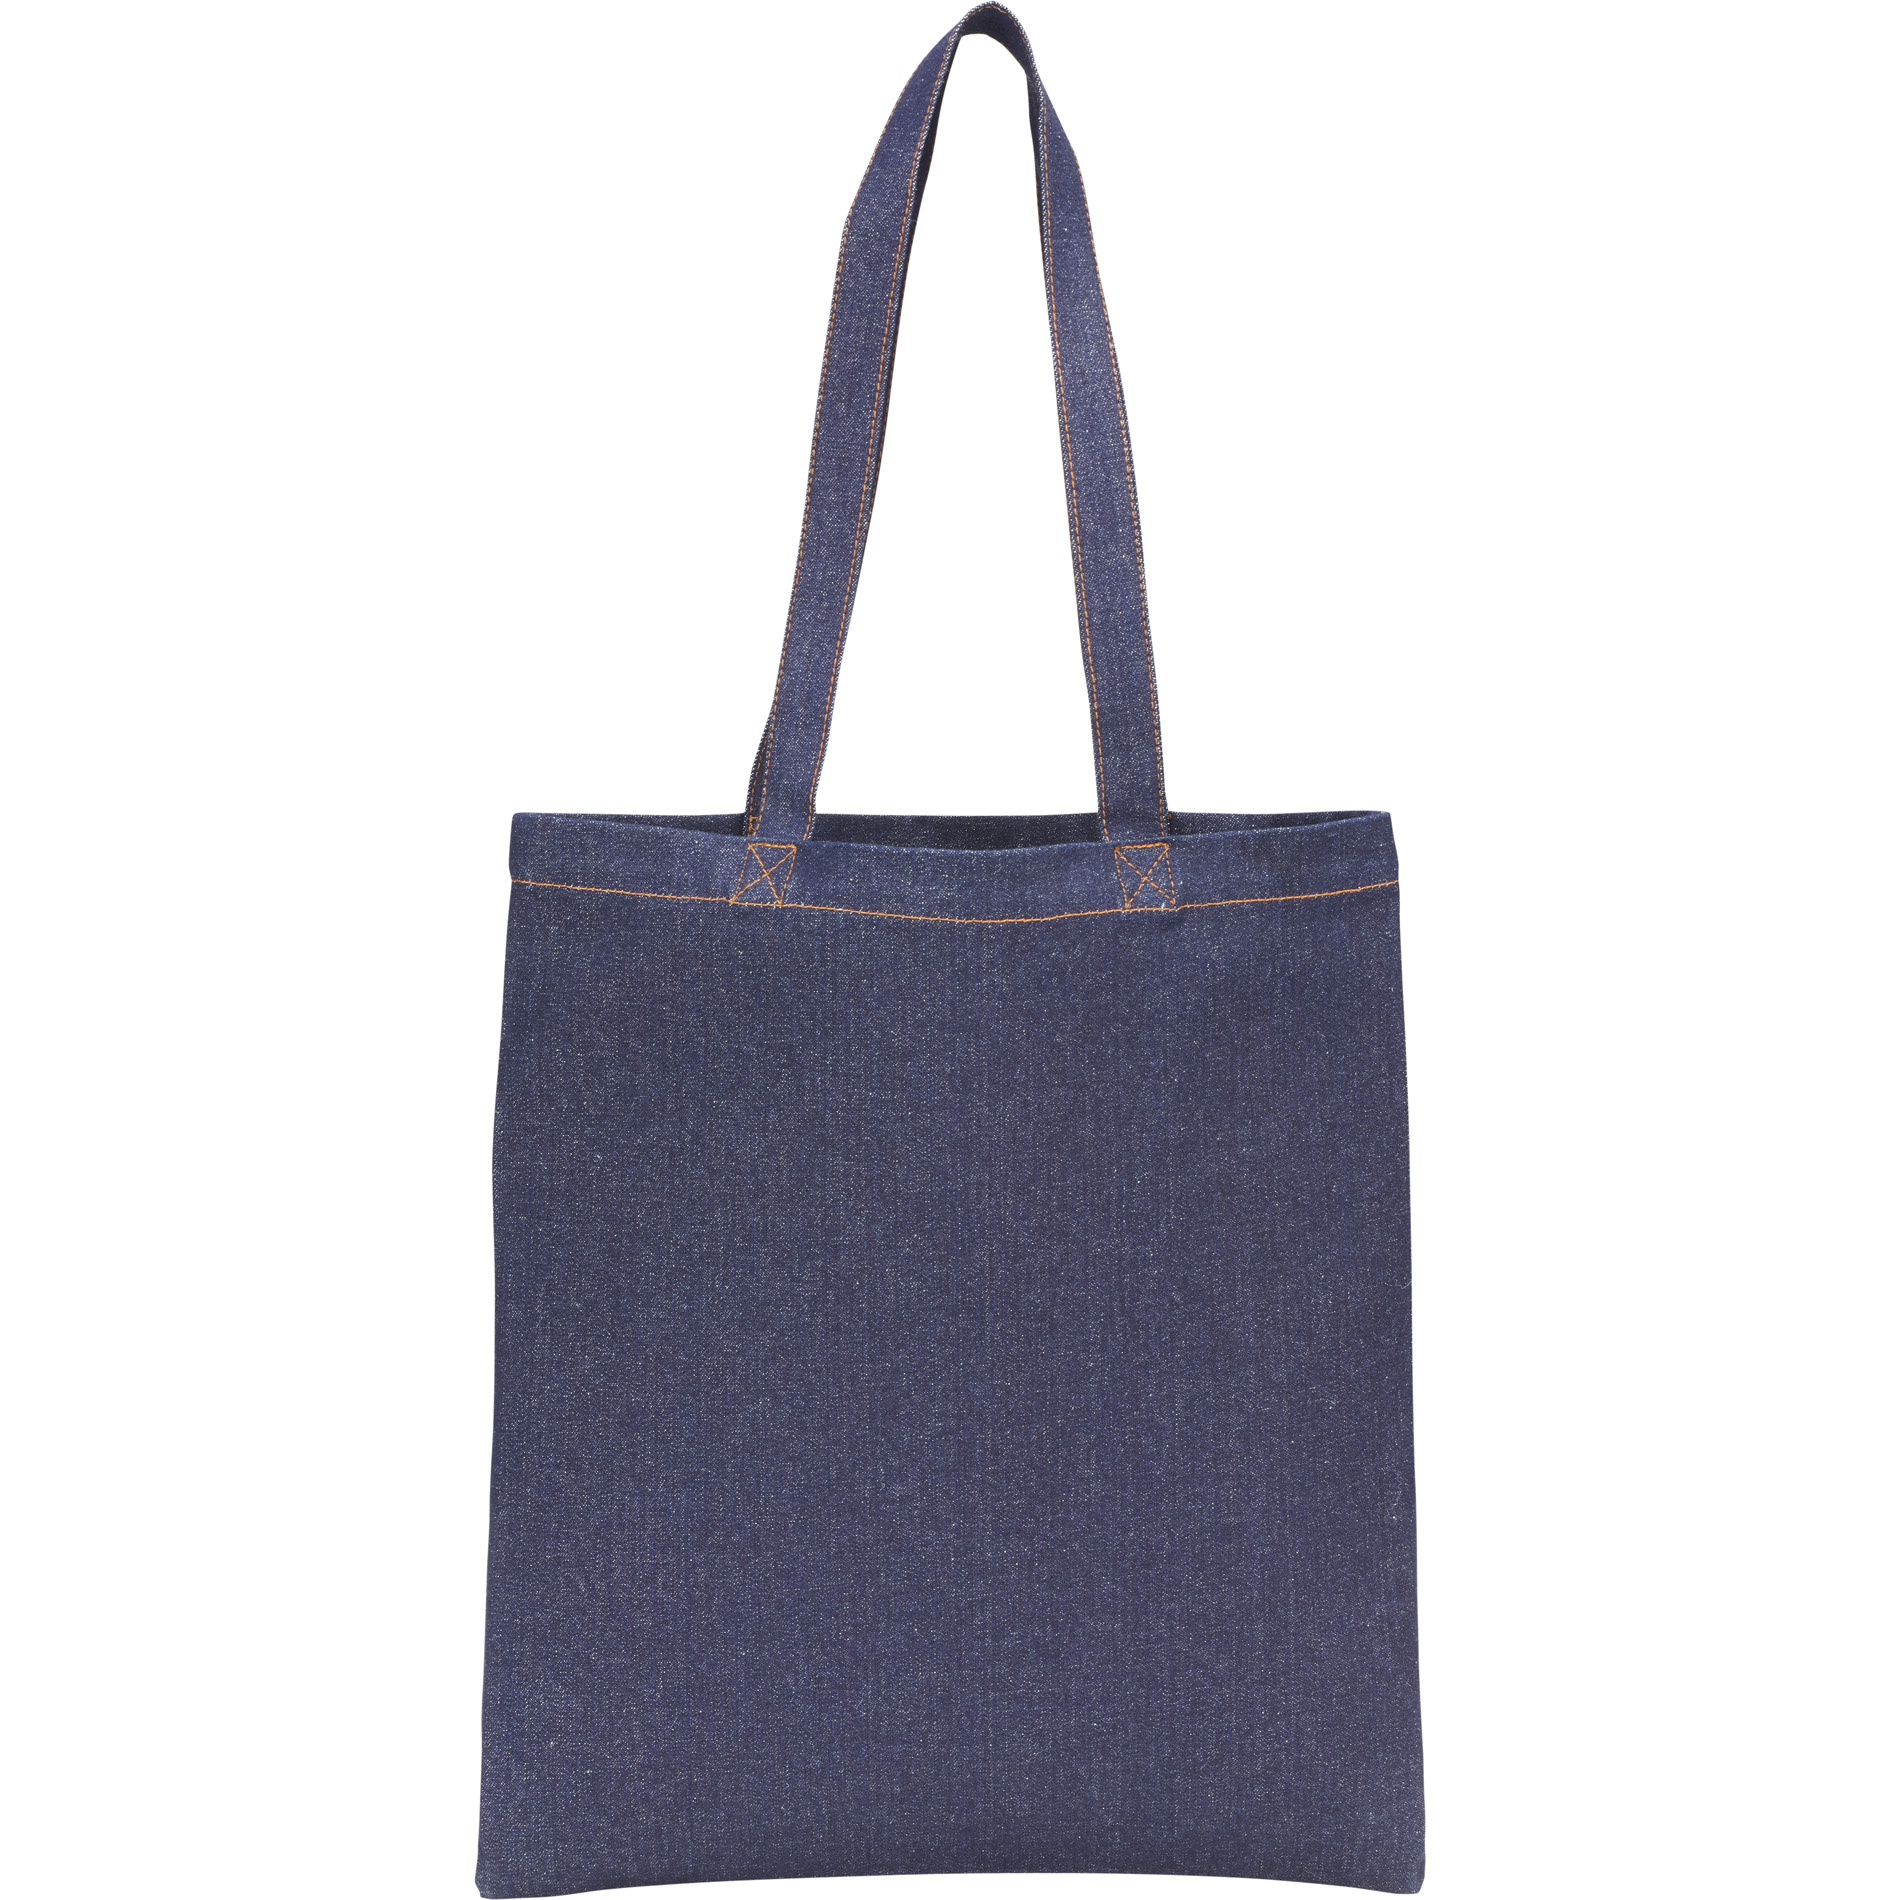 LEEDS 7900-99 - Demin Convention Tote